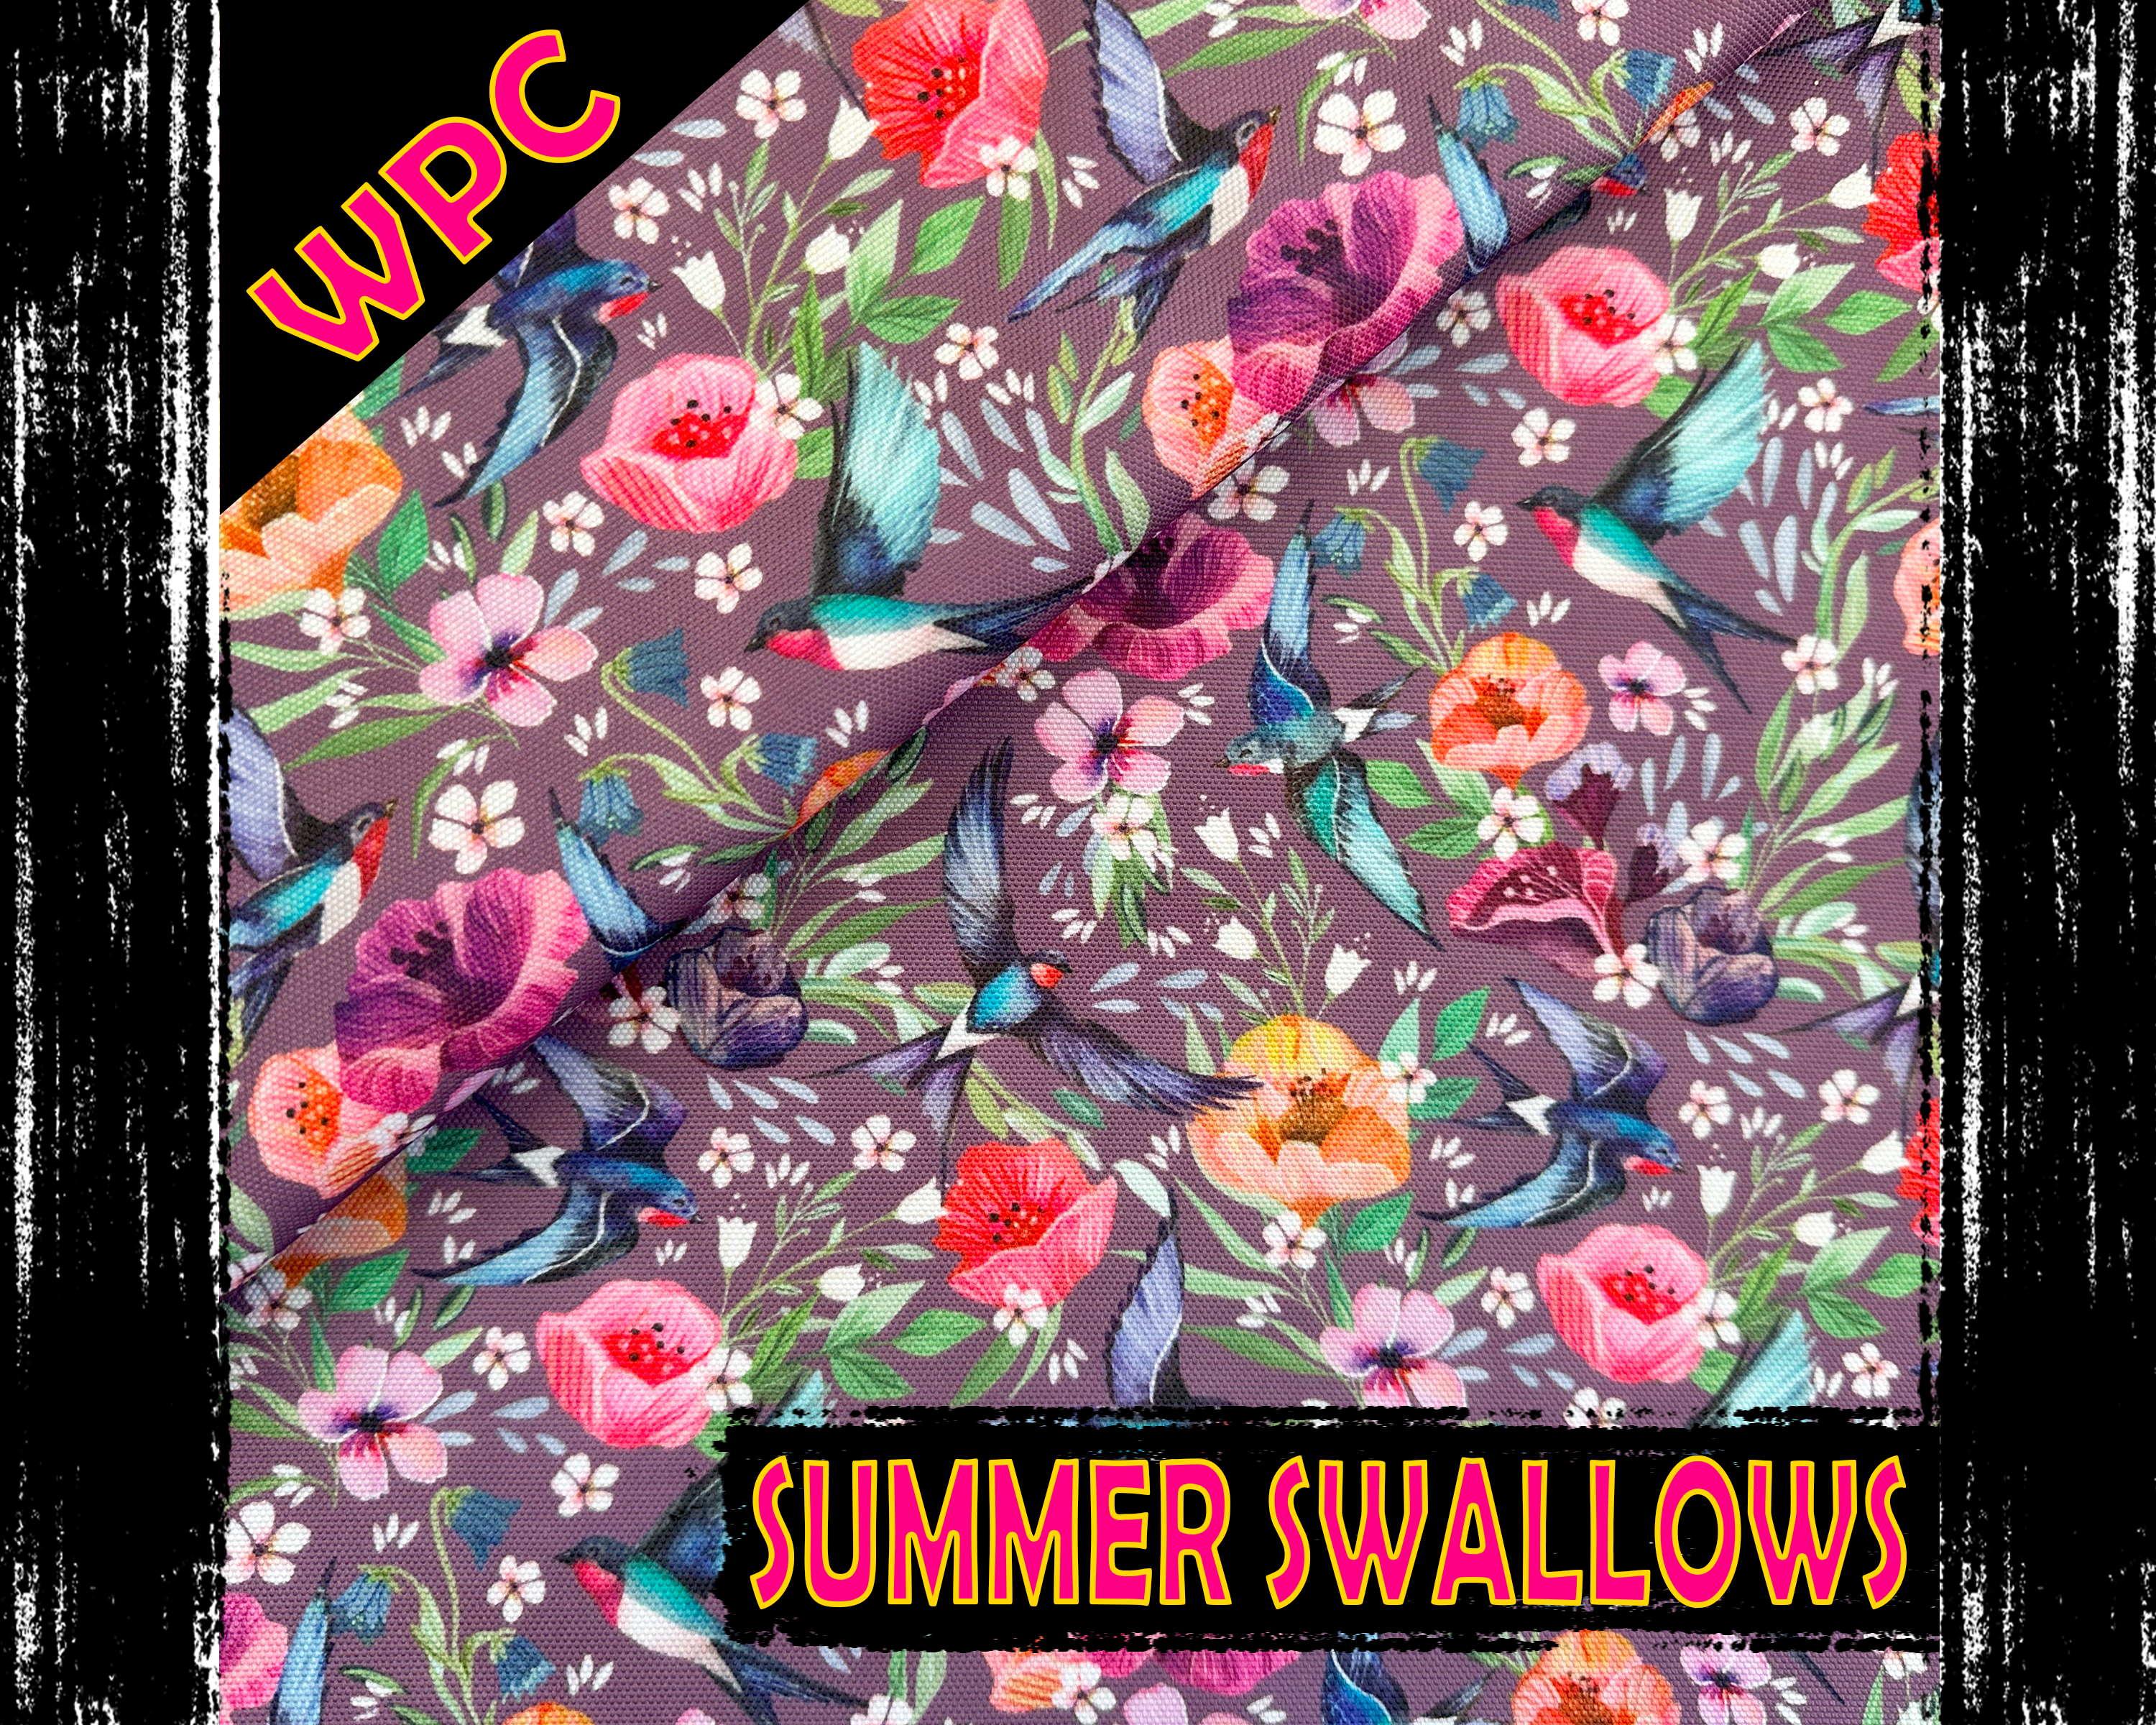 Summer Swallows, Waterproof Polyester Canvas